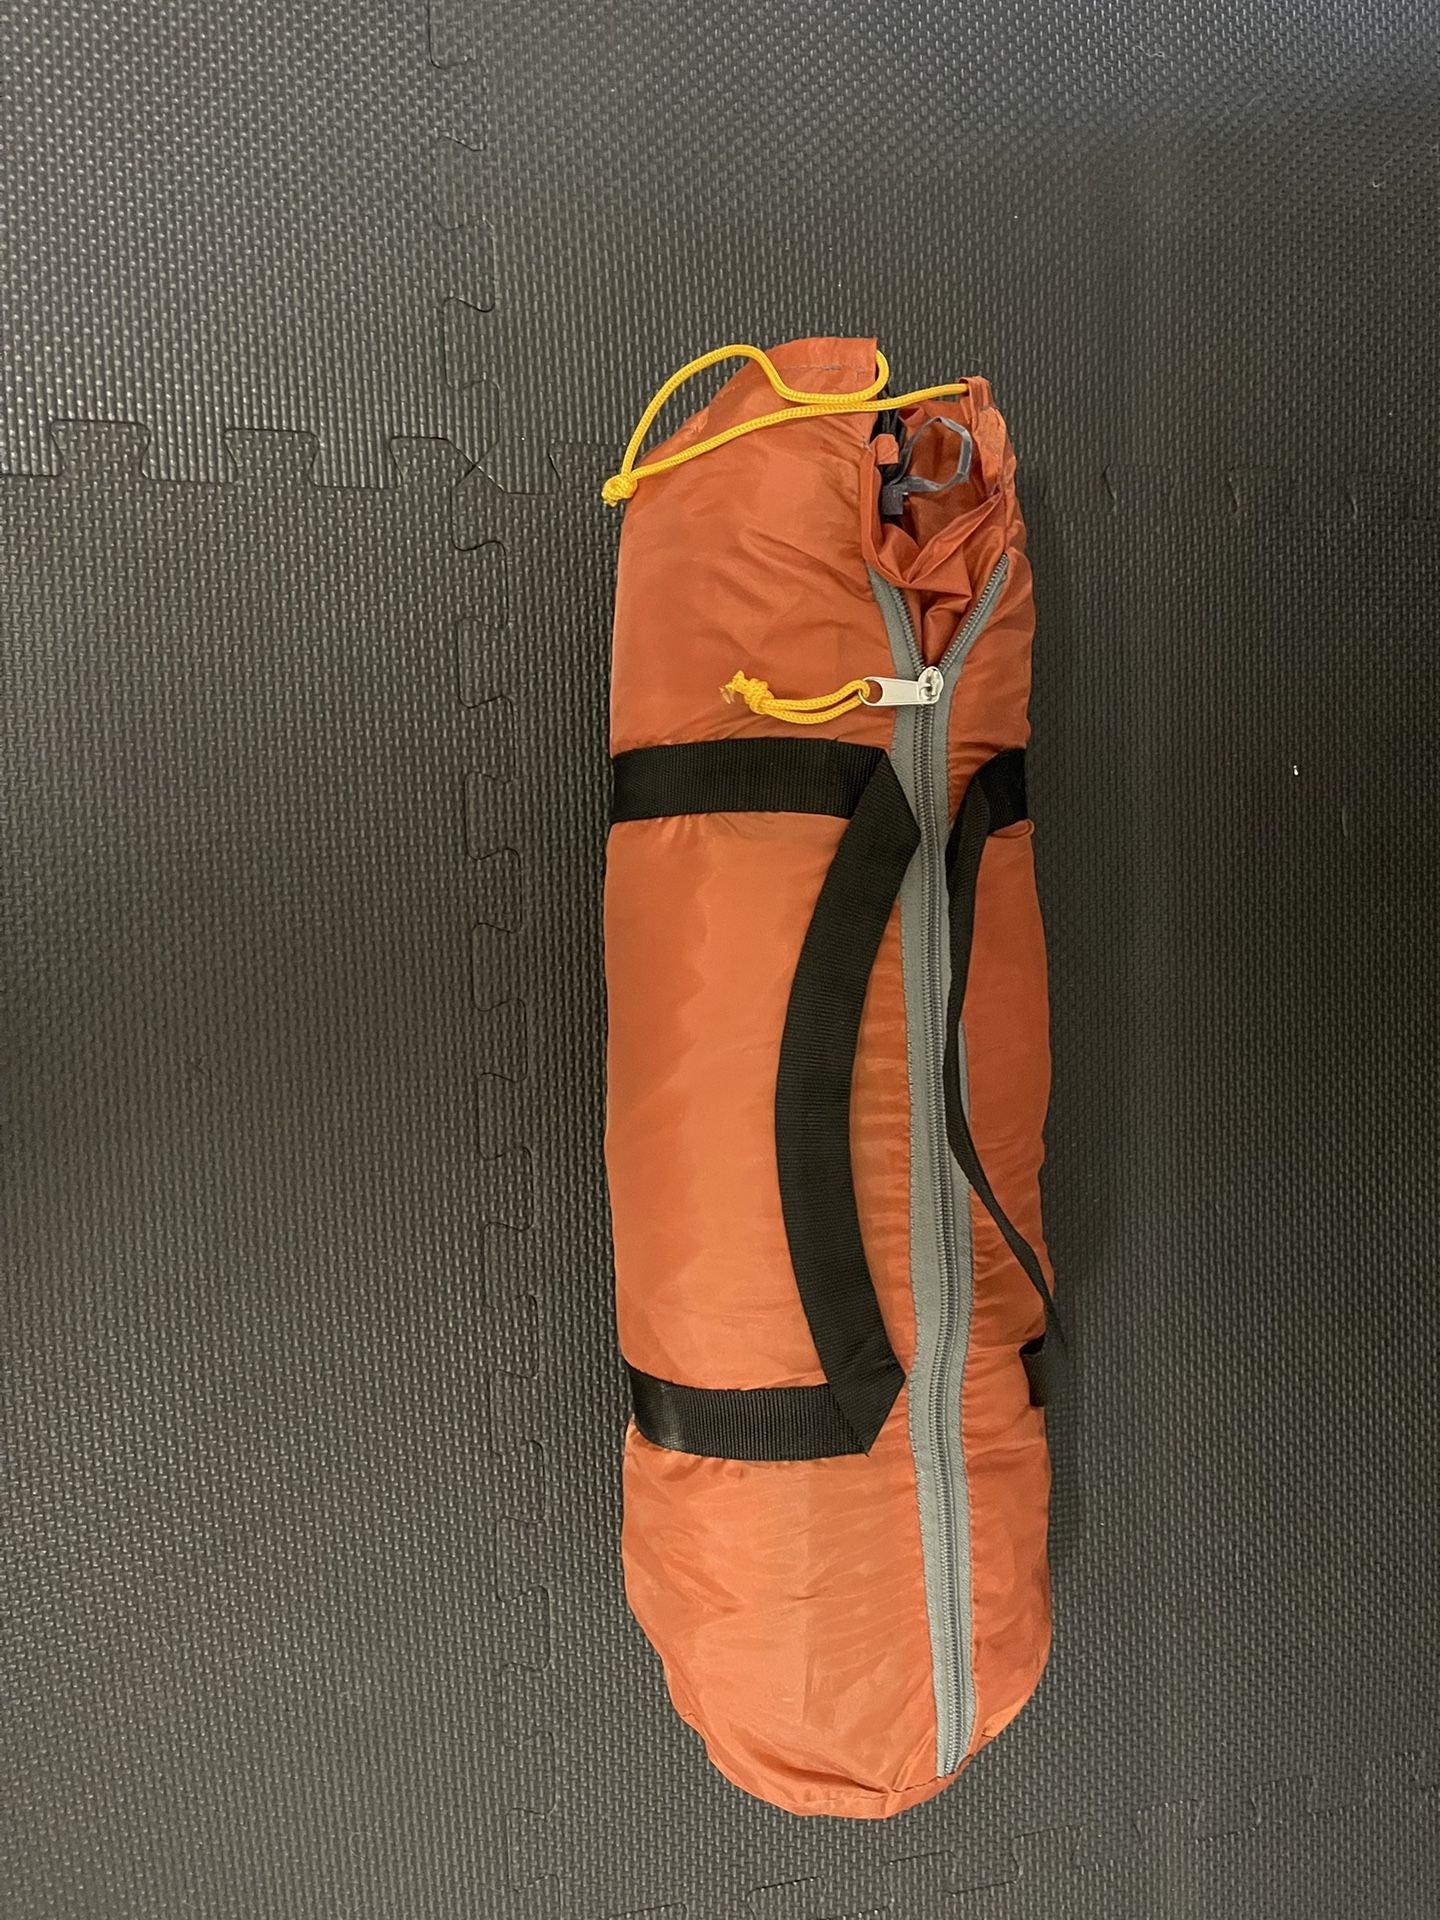 Two Person Tent & Sleeping Bag 